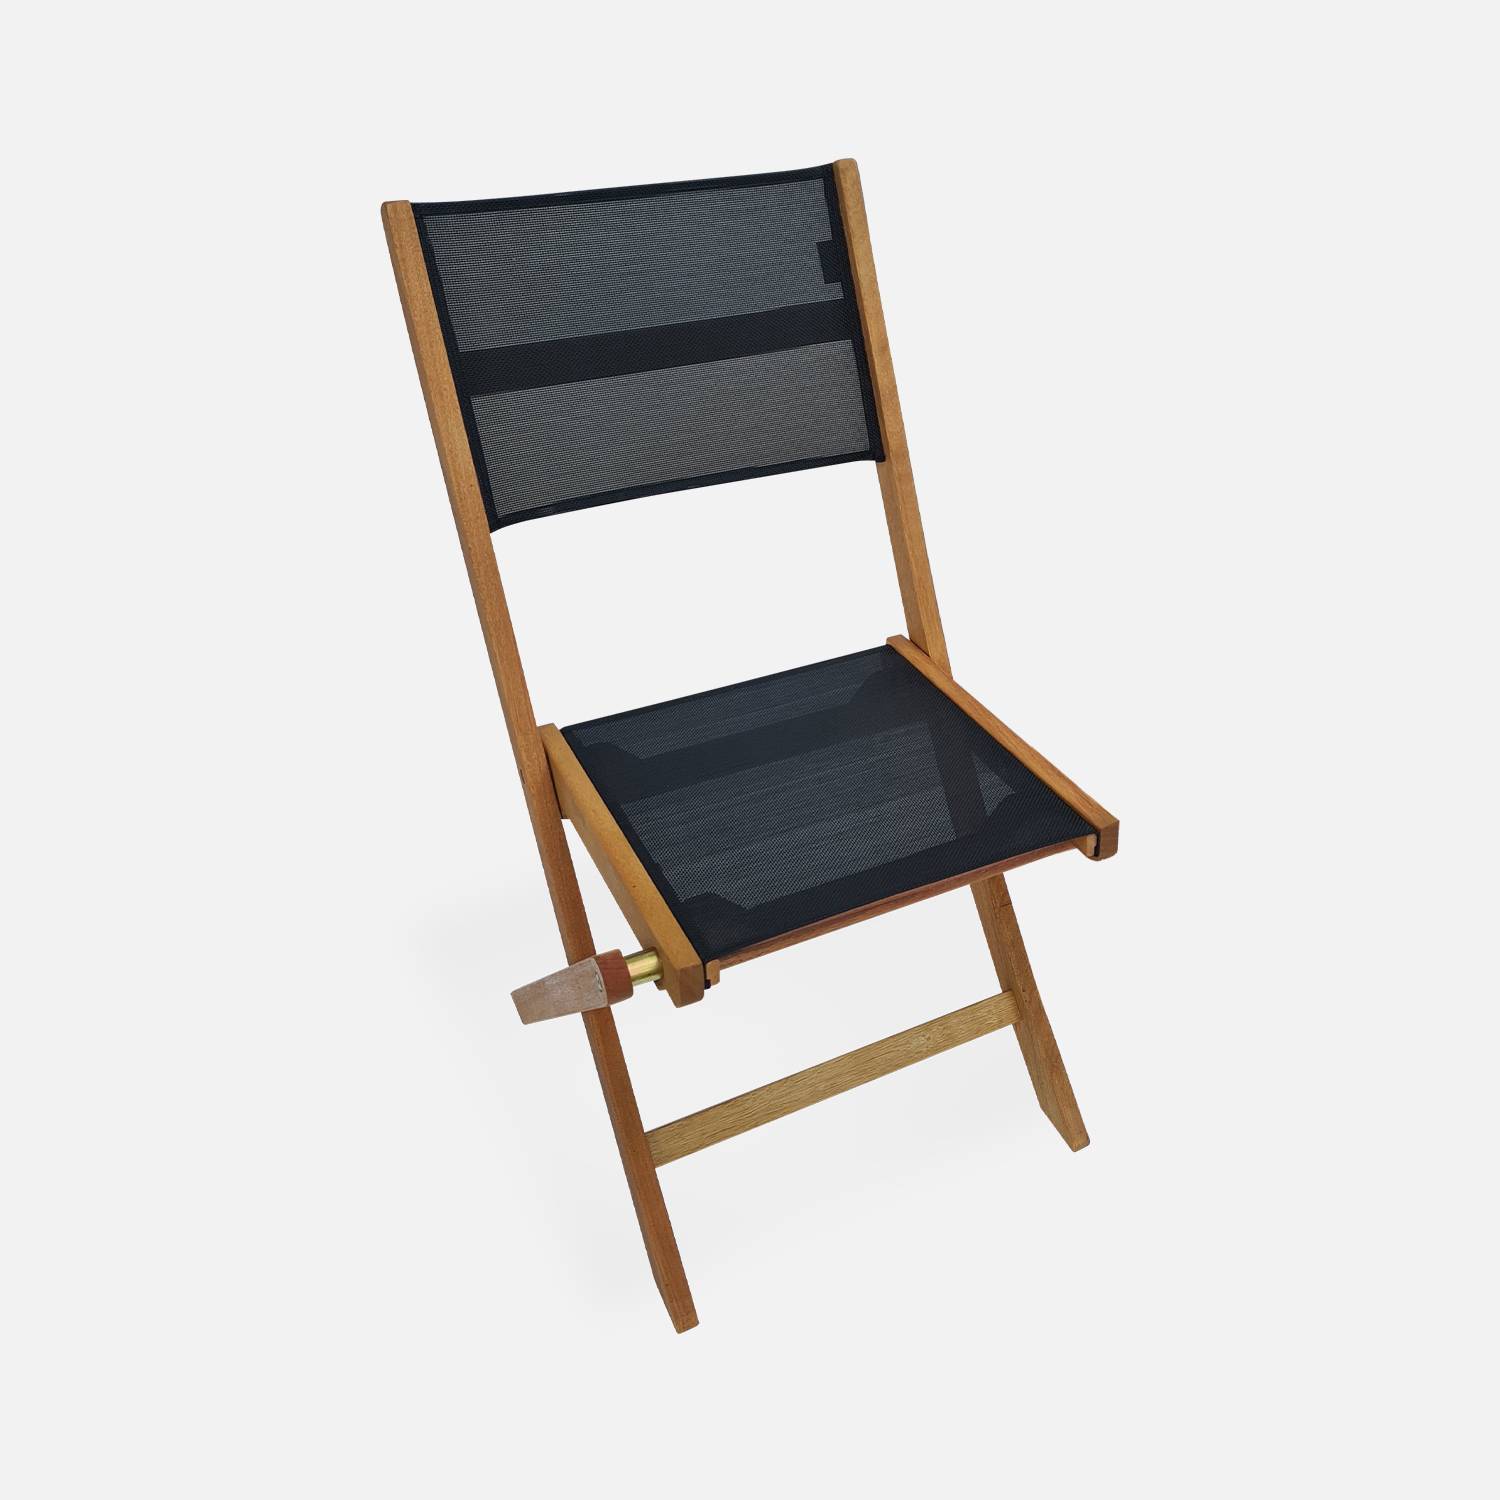 Set of 2 garden chairs in wood,  oiled FSC eucalyptus and textilene folding chairs - Almeria - Black Photo4